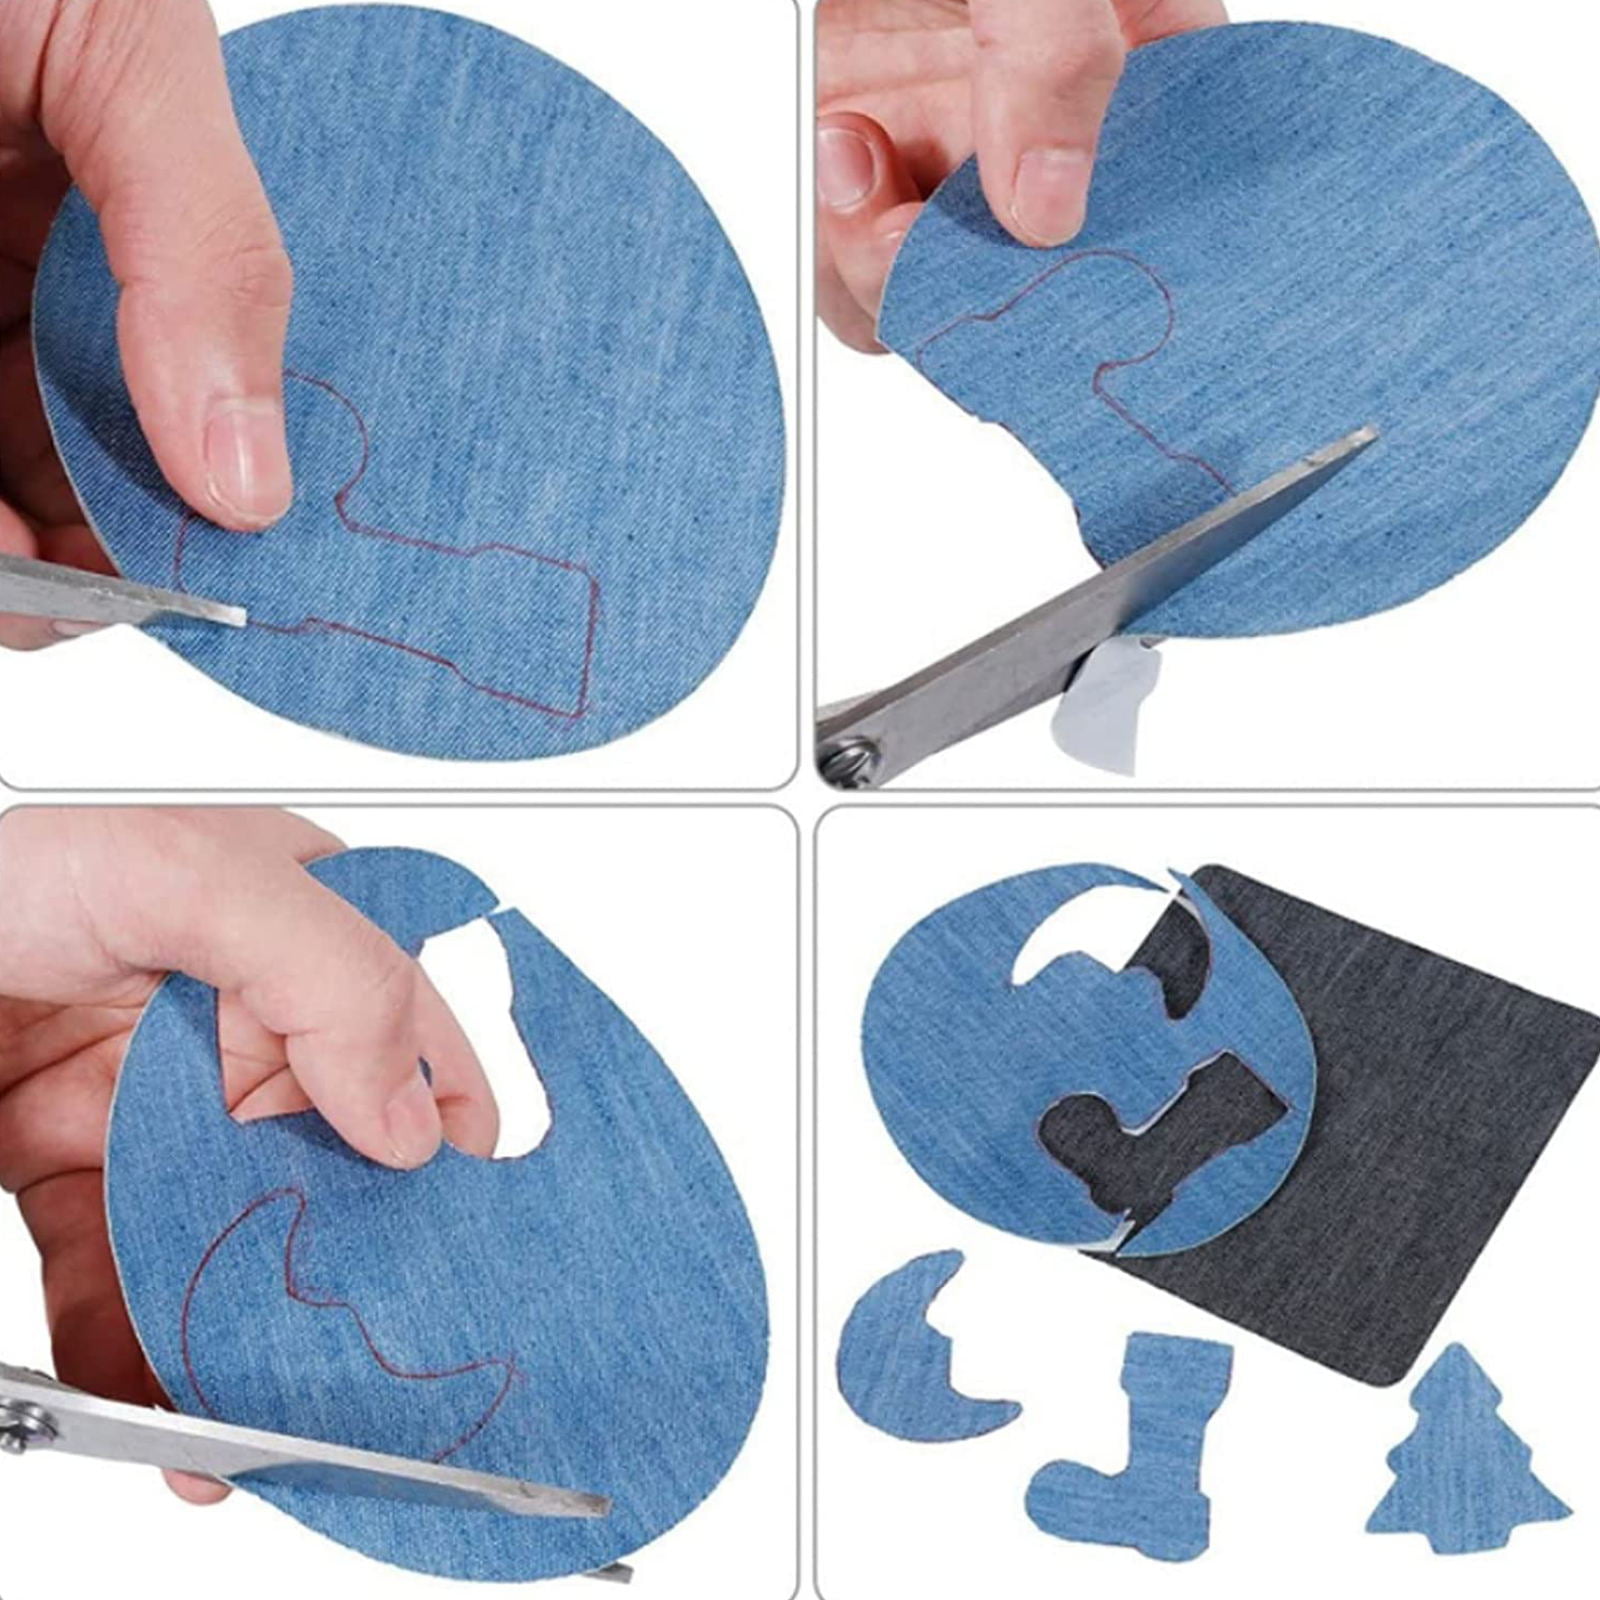 1pc Self-adhesive Denim Patch For Jeans Clothes, Hole Repair, Diy  Decoration Adhesive Sticker Fabric Applique